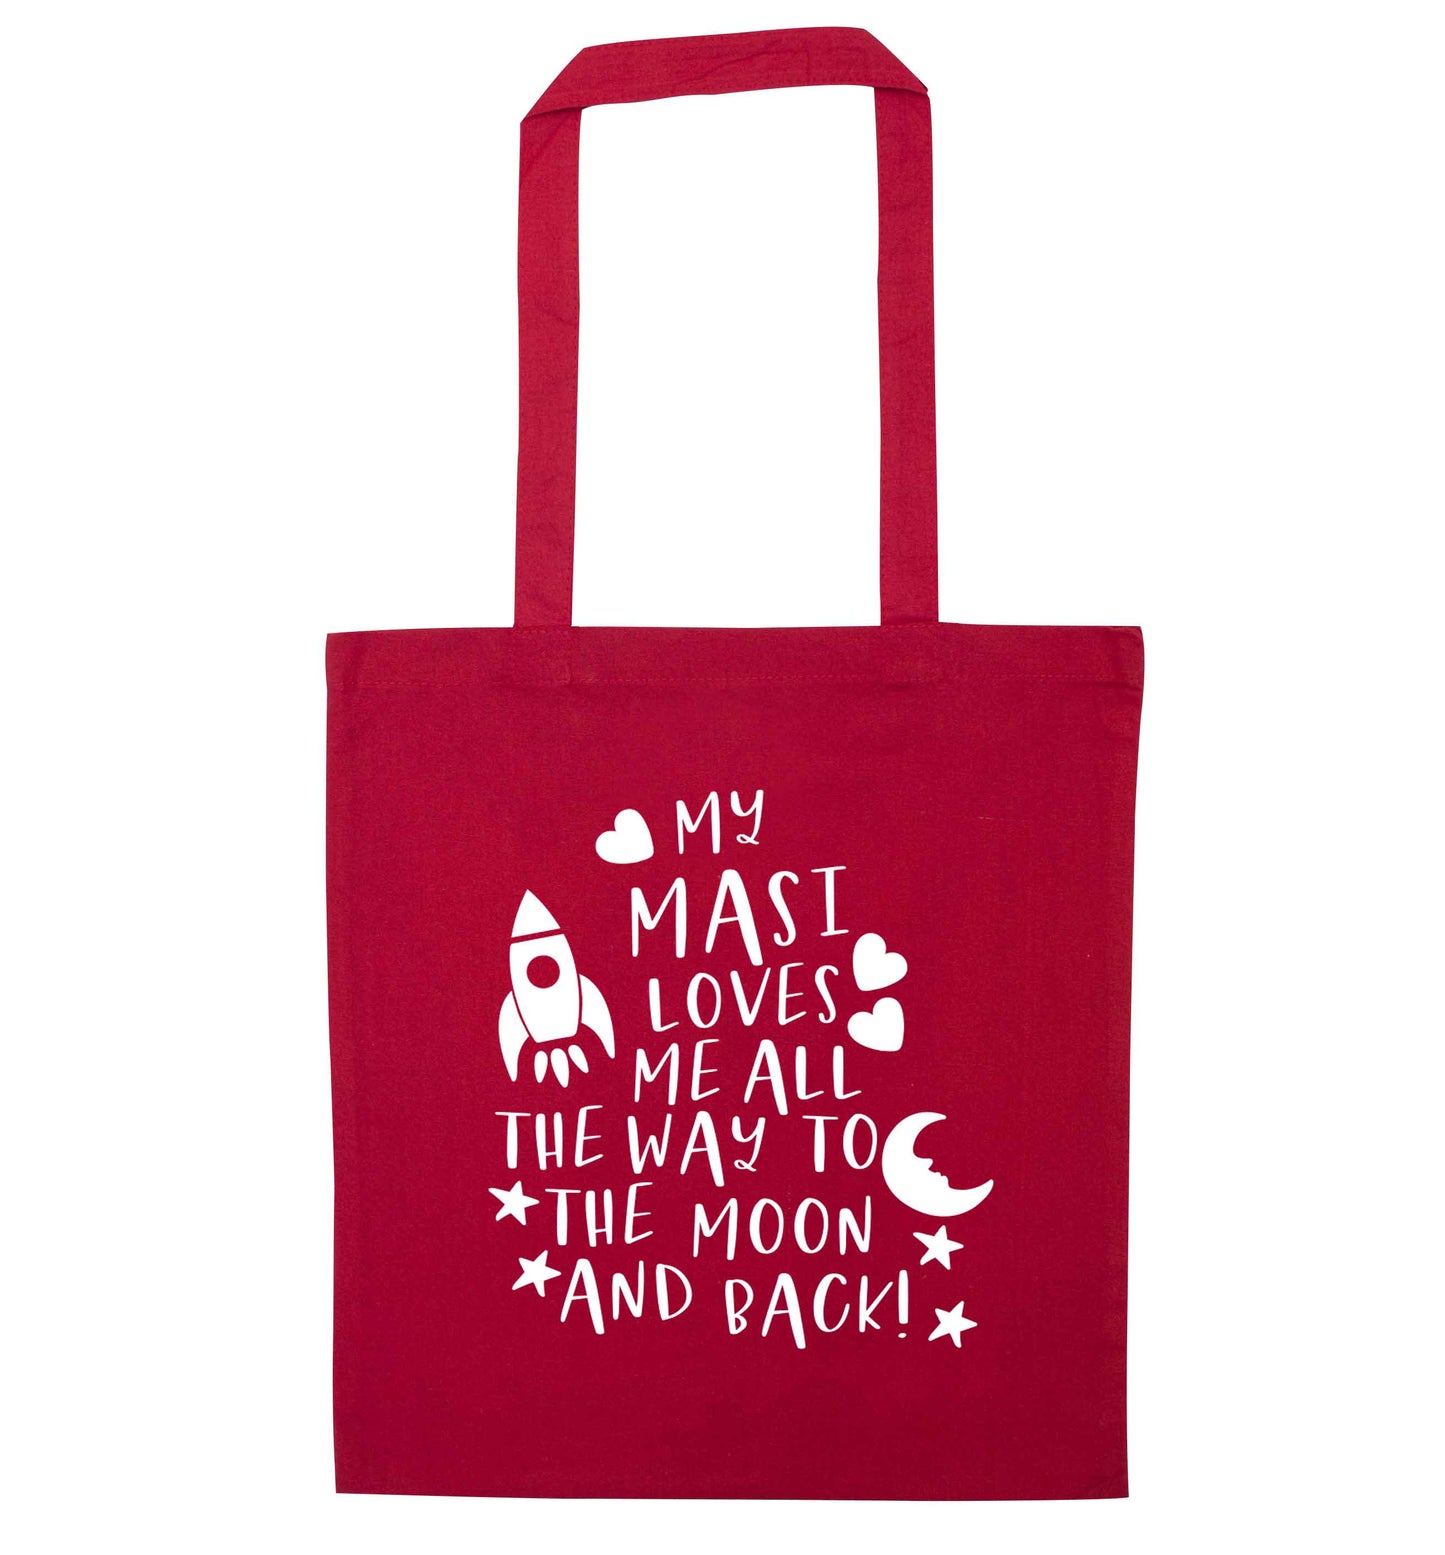 My masi loves me all the way to the moon and back red tote bag